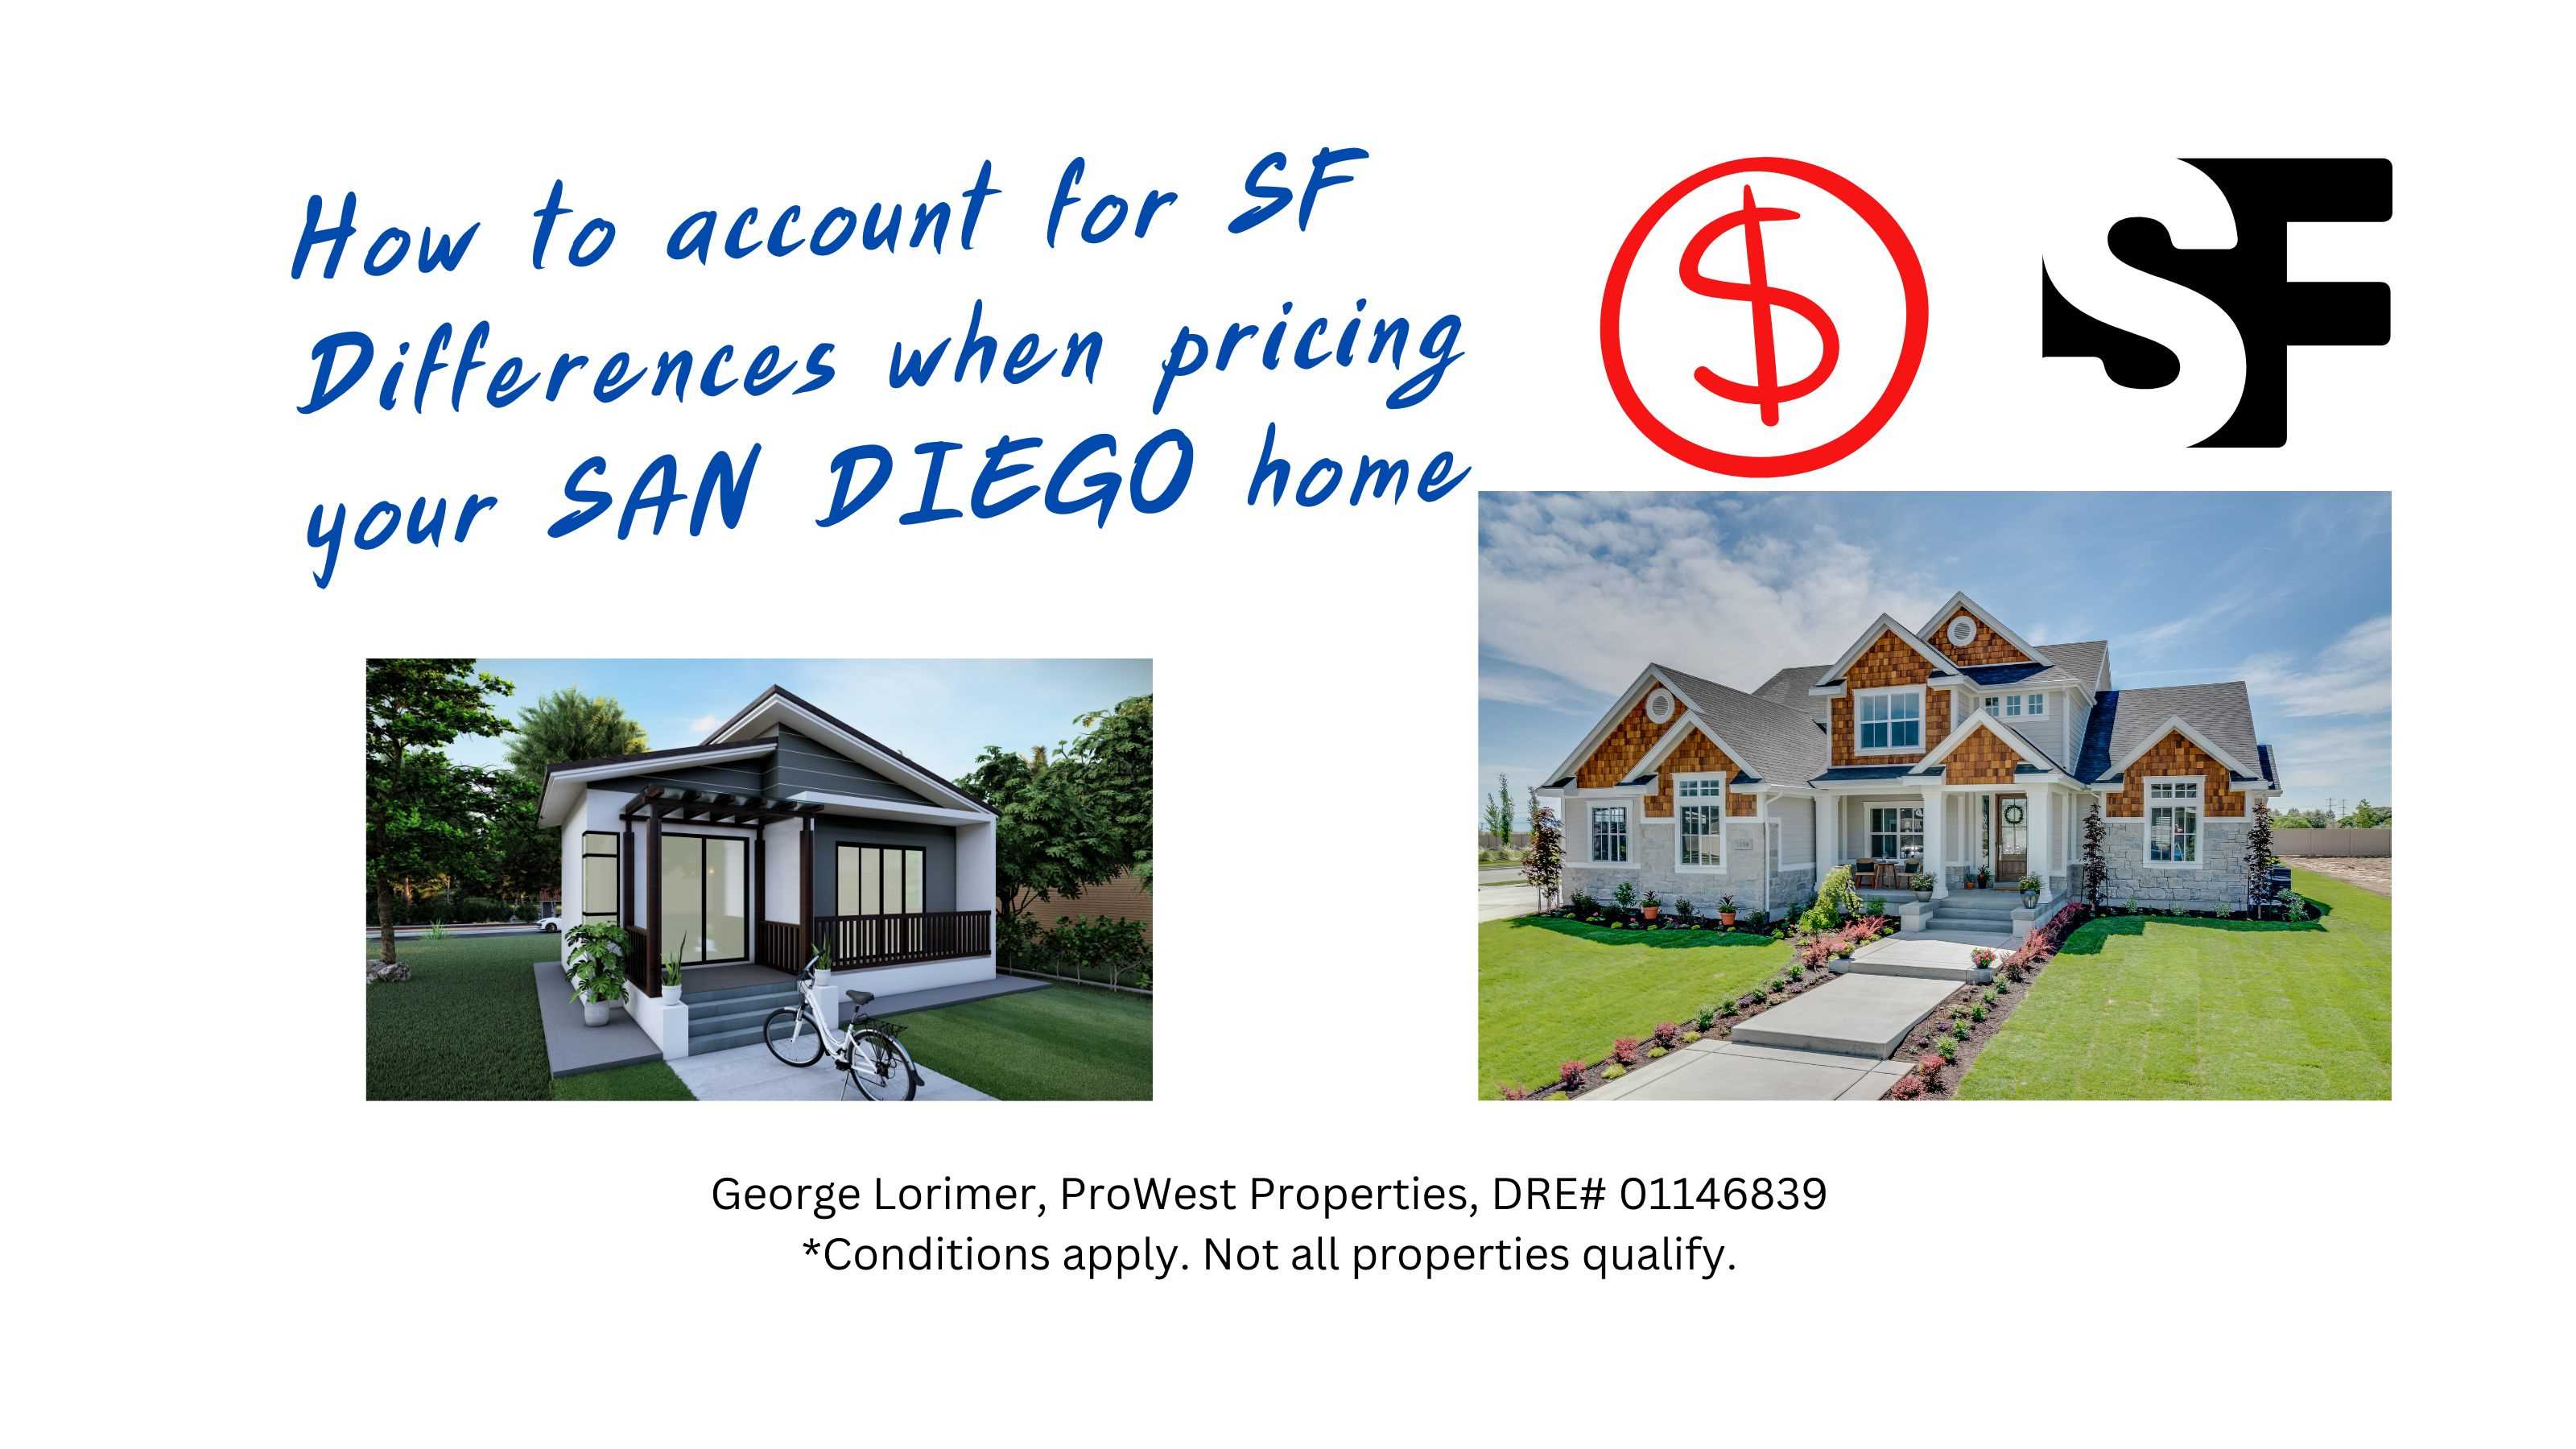 SF differences effect San Diego home prices